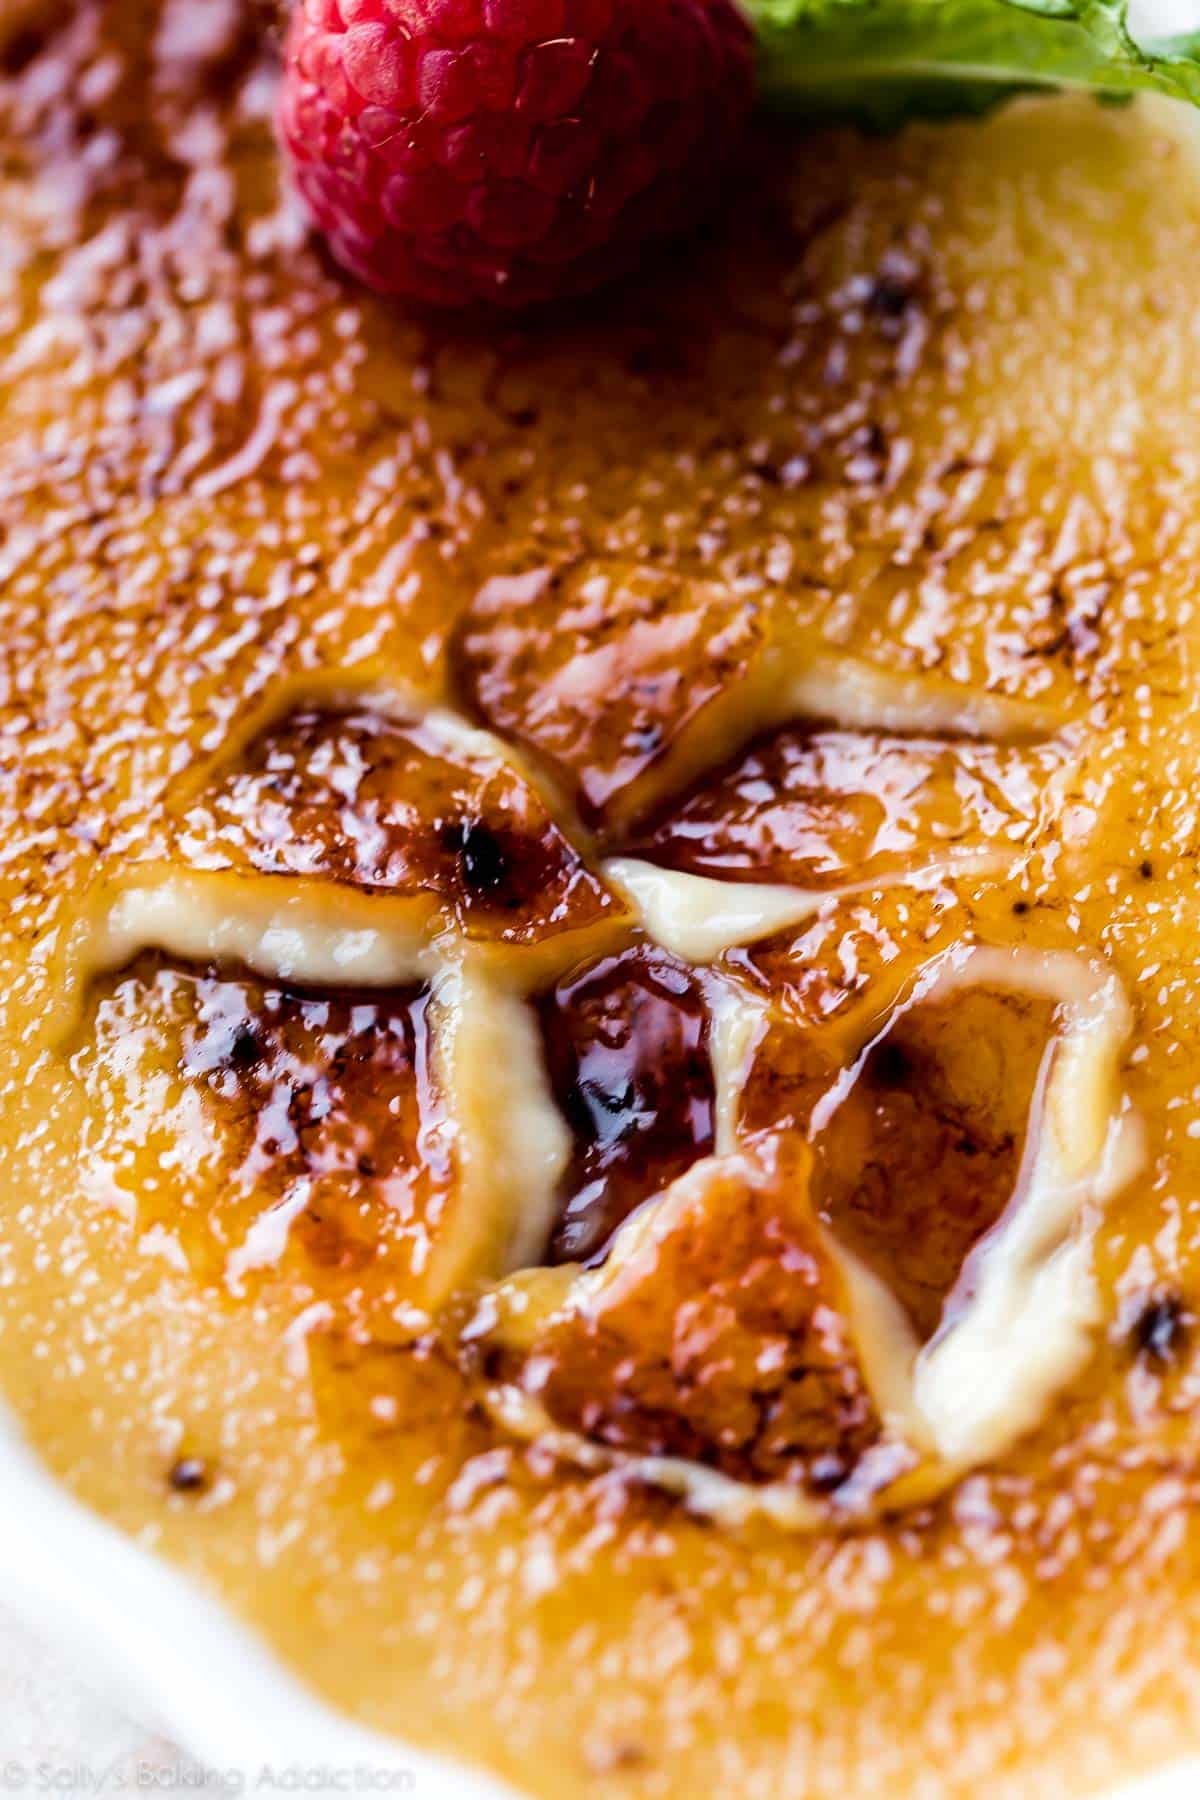 zoomed in image of burnt sugar topping on creme brulee